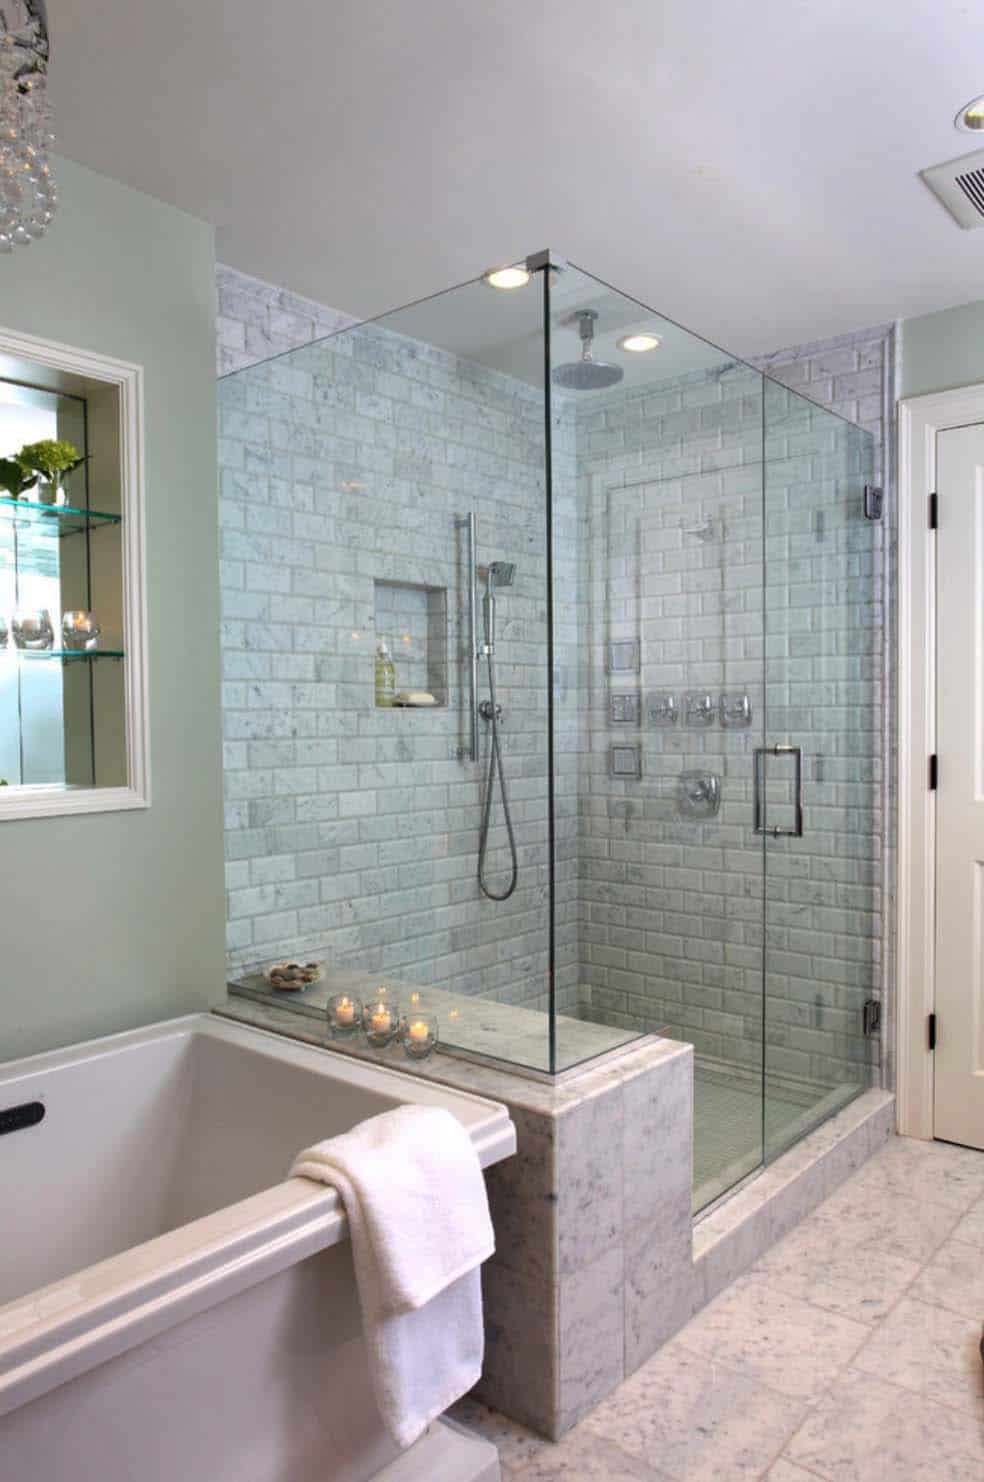 Bathroom Layout Design
 53 Most fabulous traditional style bathroom designs ever